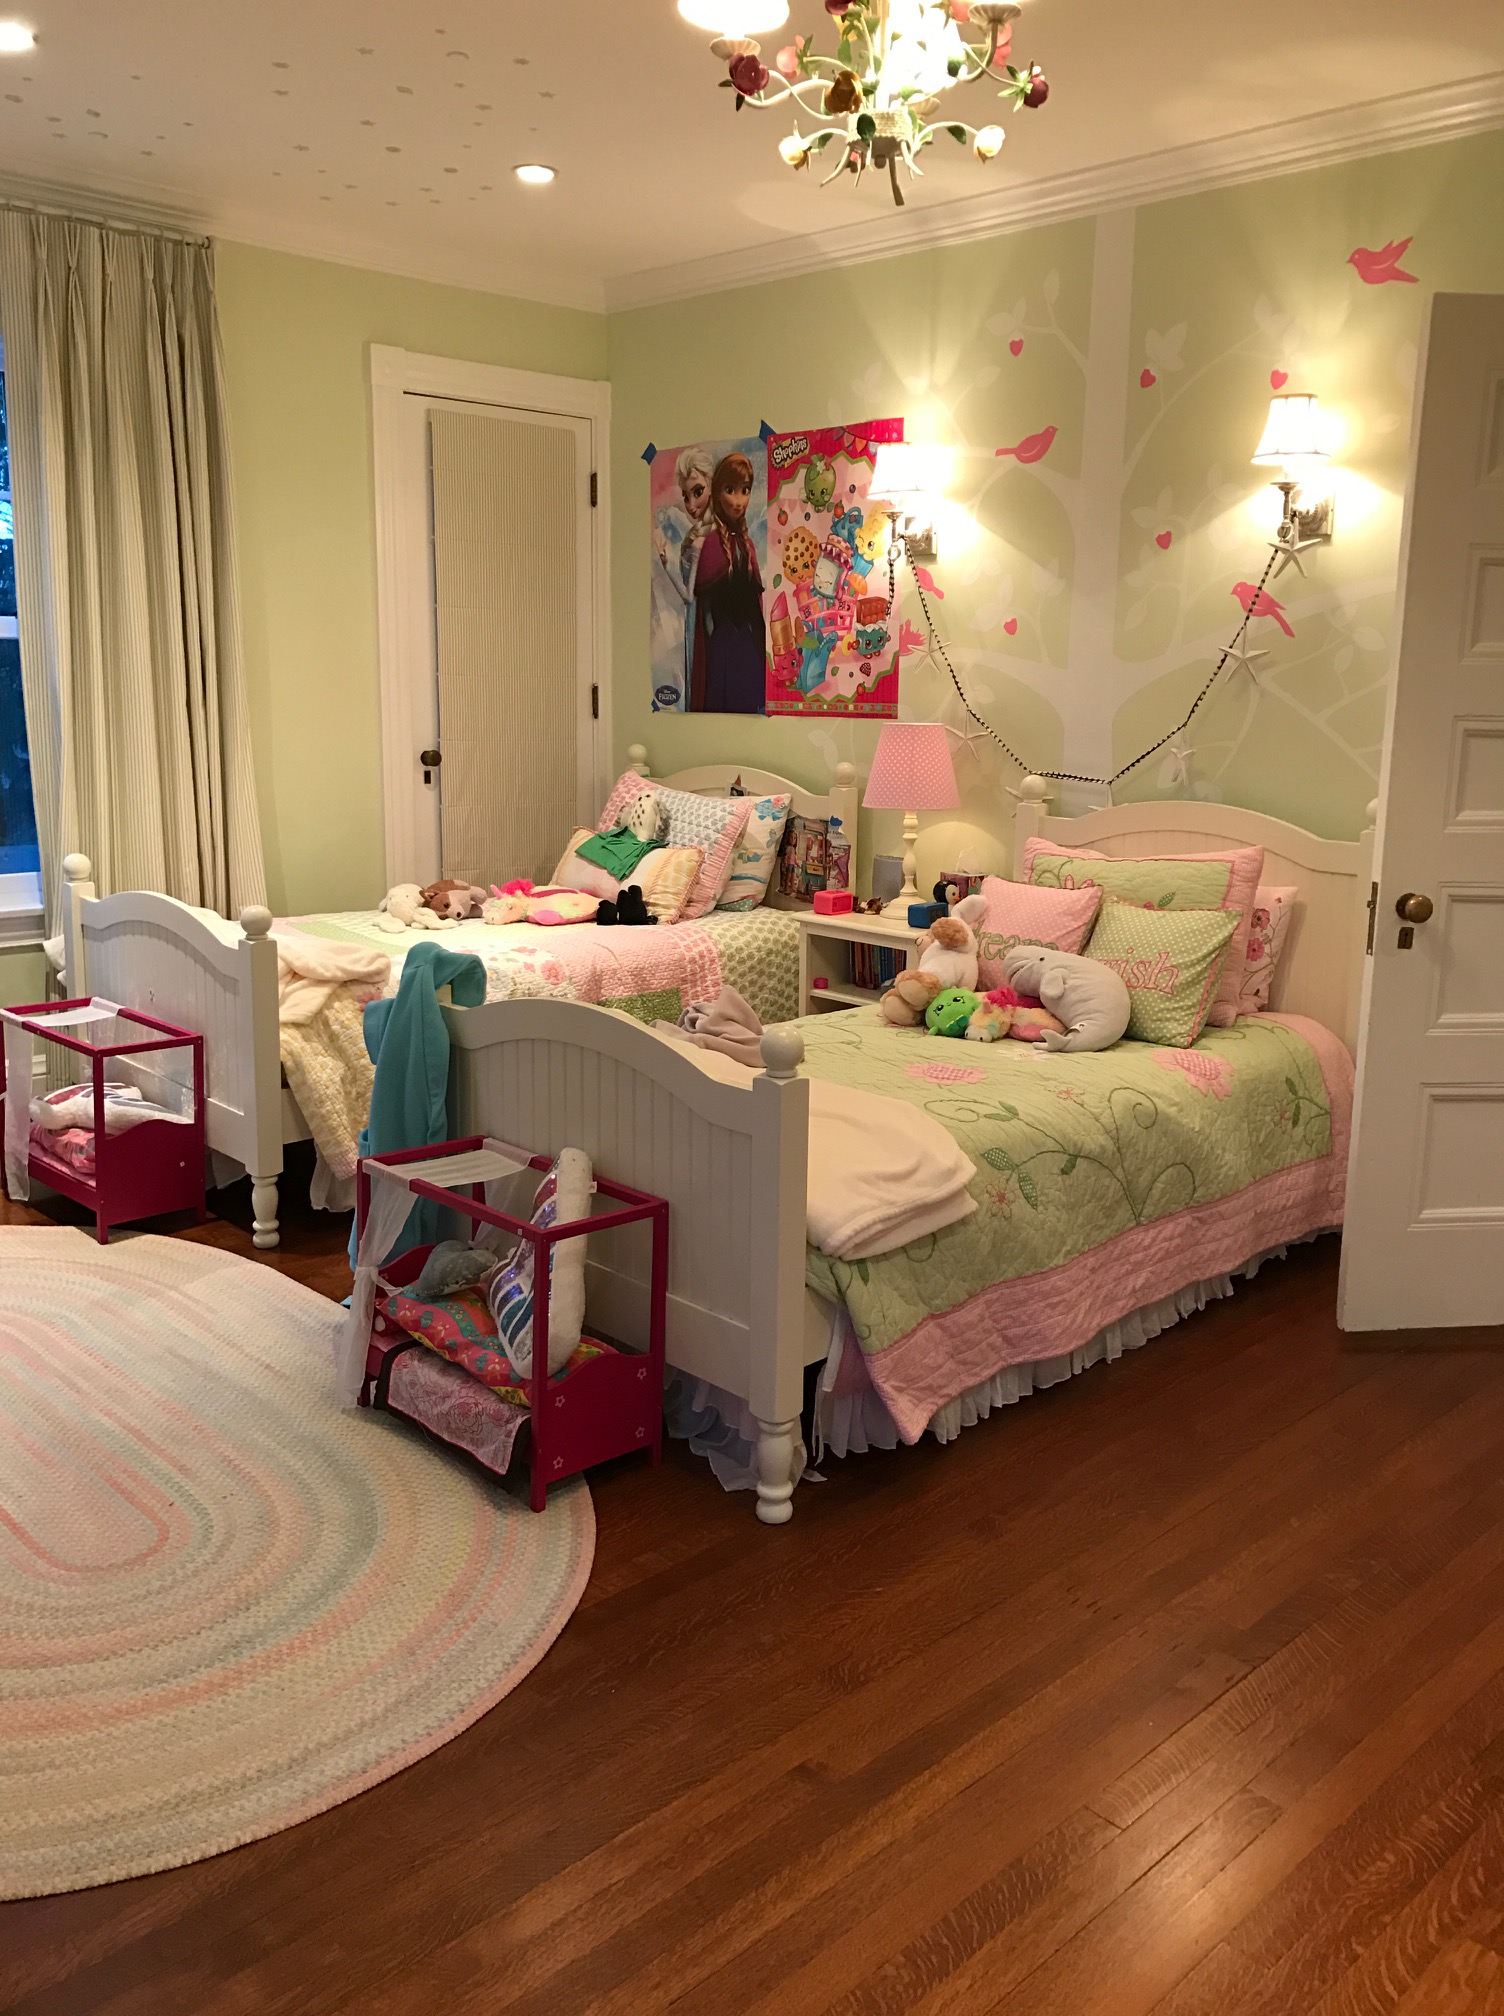 One Room Challenge Week 2: Embrace the Change | Interiors for Families | Kelly Rogers Interiors